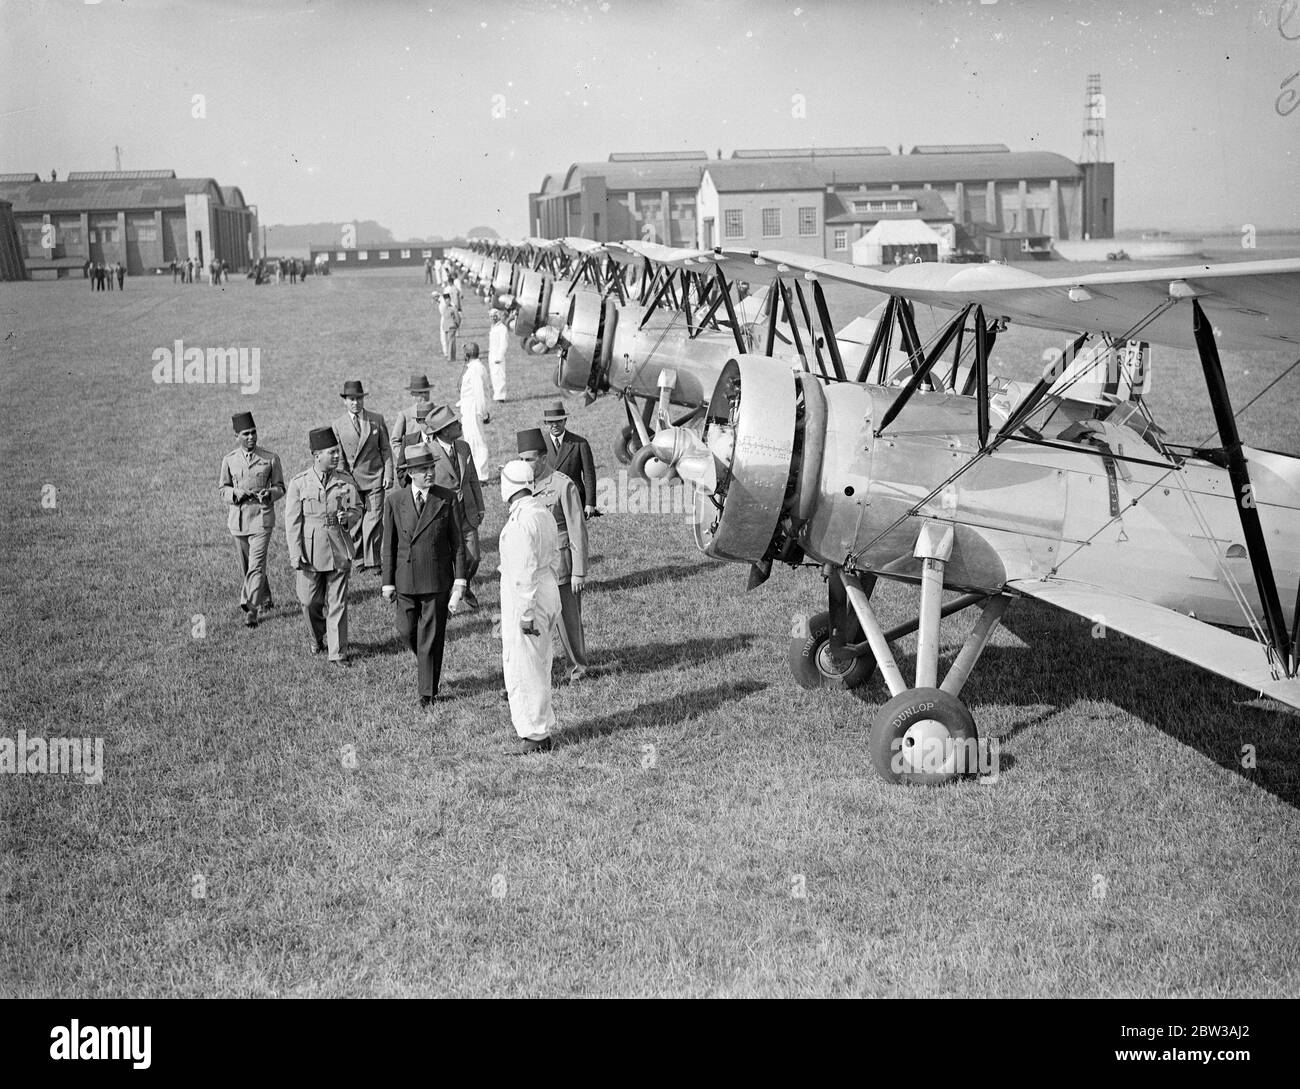 Egyptian air squadron tested at Lympne before formation flight to Egypt . To be used to suppress dope smuggling . A fleet of ten Avro biplanes built in England for the Egyptian Government underwent tests and official inspection at Lympne Aerodrome , Kent , before taking off for a formation flight to Cairo . The planes will be used in Egypt for military purposes and in suppressing the drug traffic . Photo shows the Egyptian Charge d ' Affaires in London , H E Hakki Bey , inspecting the squadron at Lympne . 14 September 1934 Stock Photo